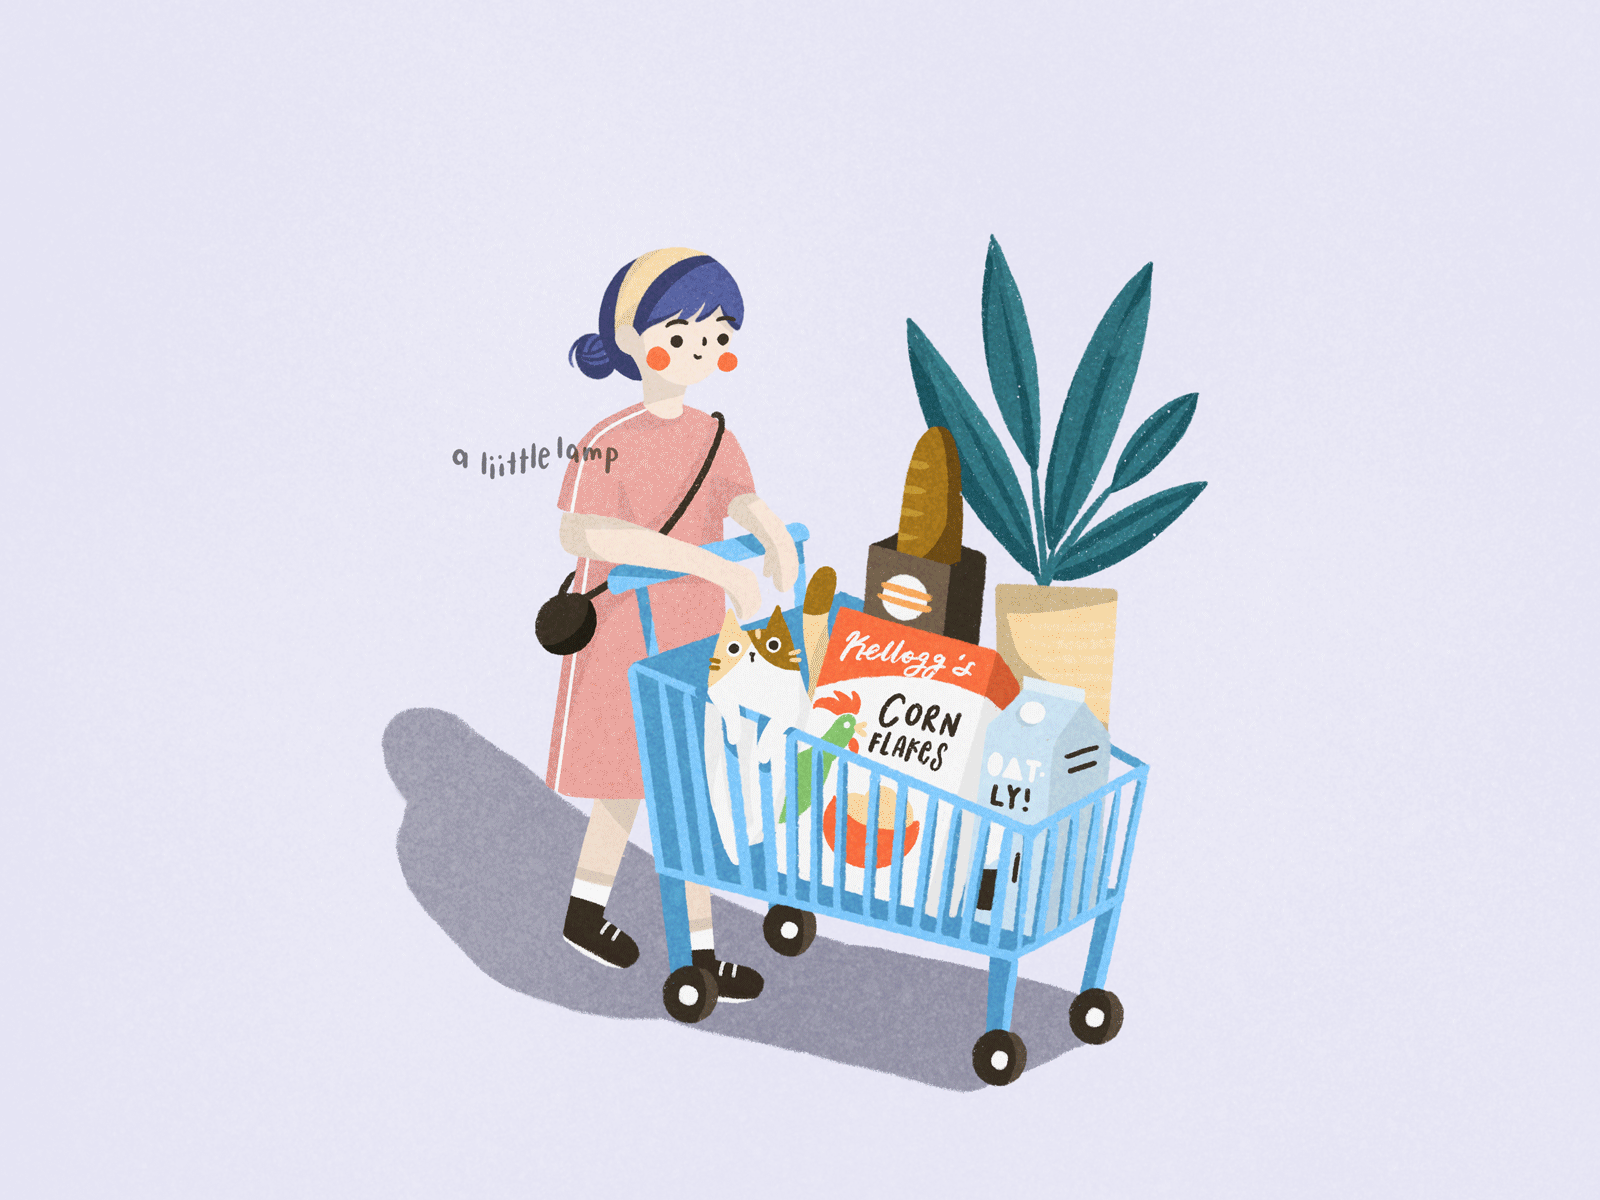 Grocery Shopping